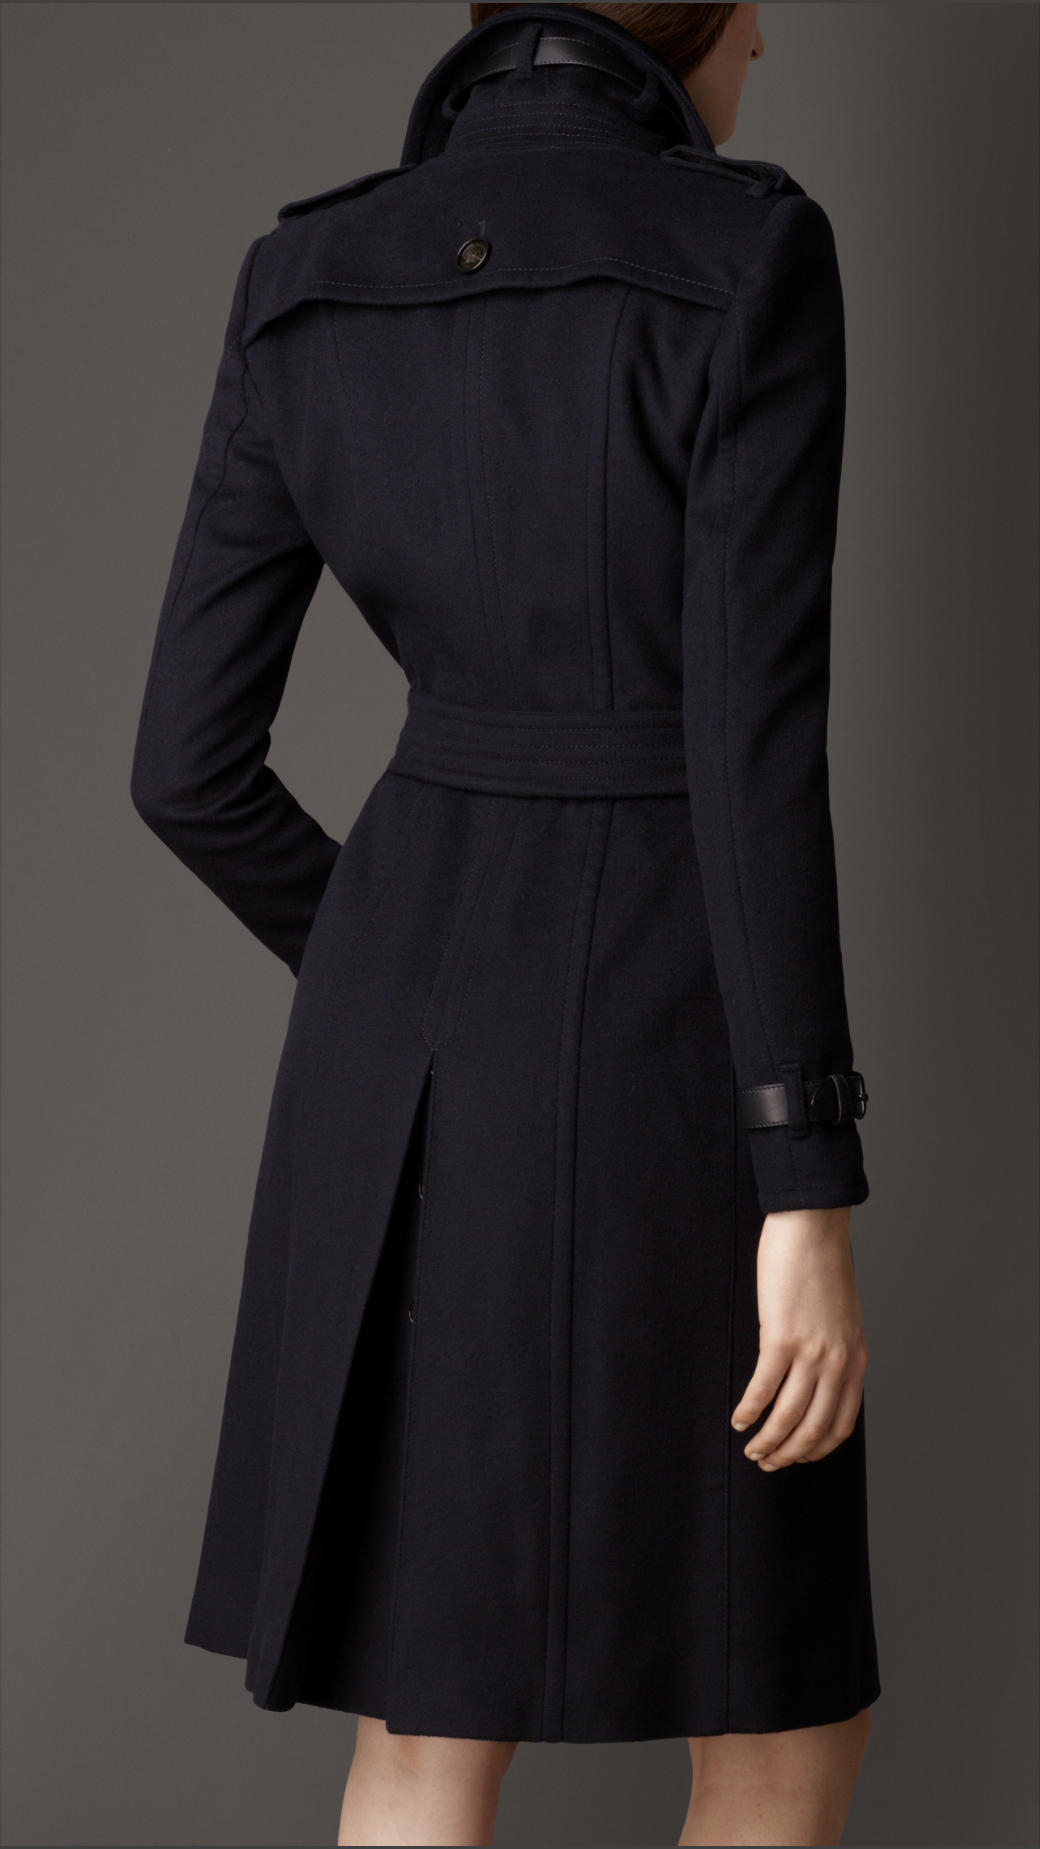 Lyst - Burberry Leather Trim Wool Cashmere Trench Coat in Blue